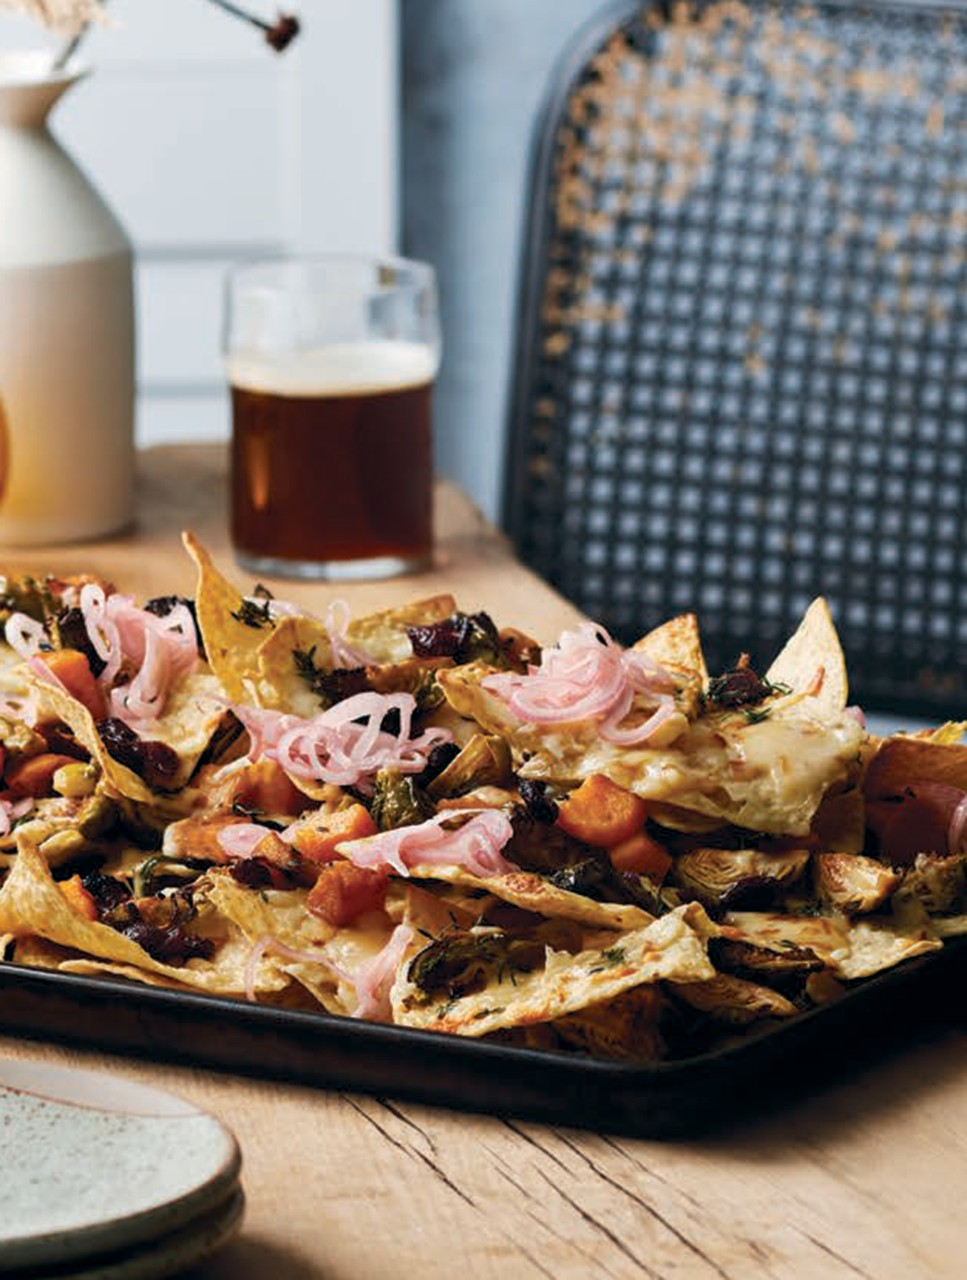 Harvest Nachos with Squash, Brussels Sprouts & Smoked Cheddar